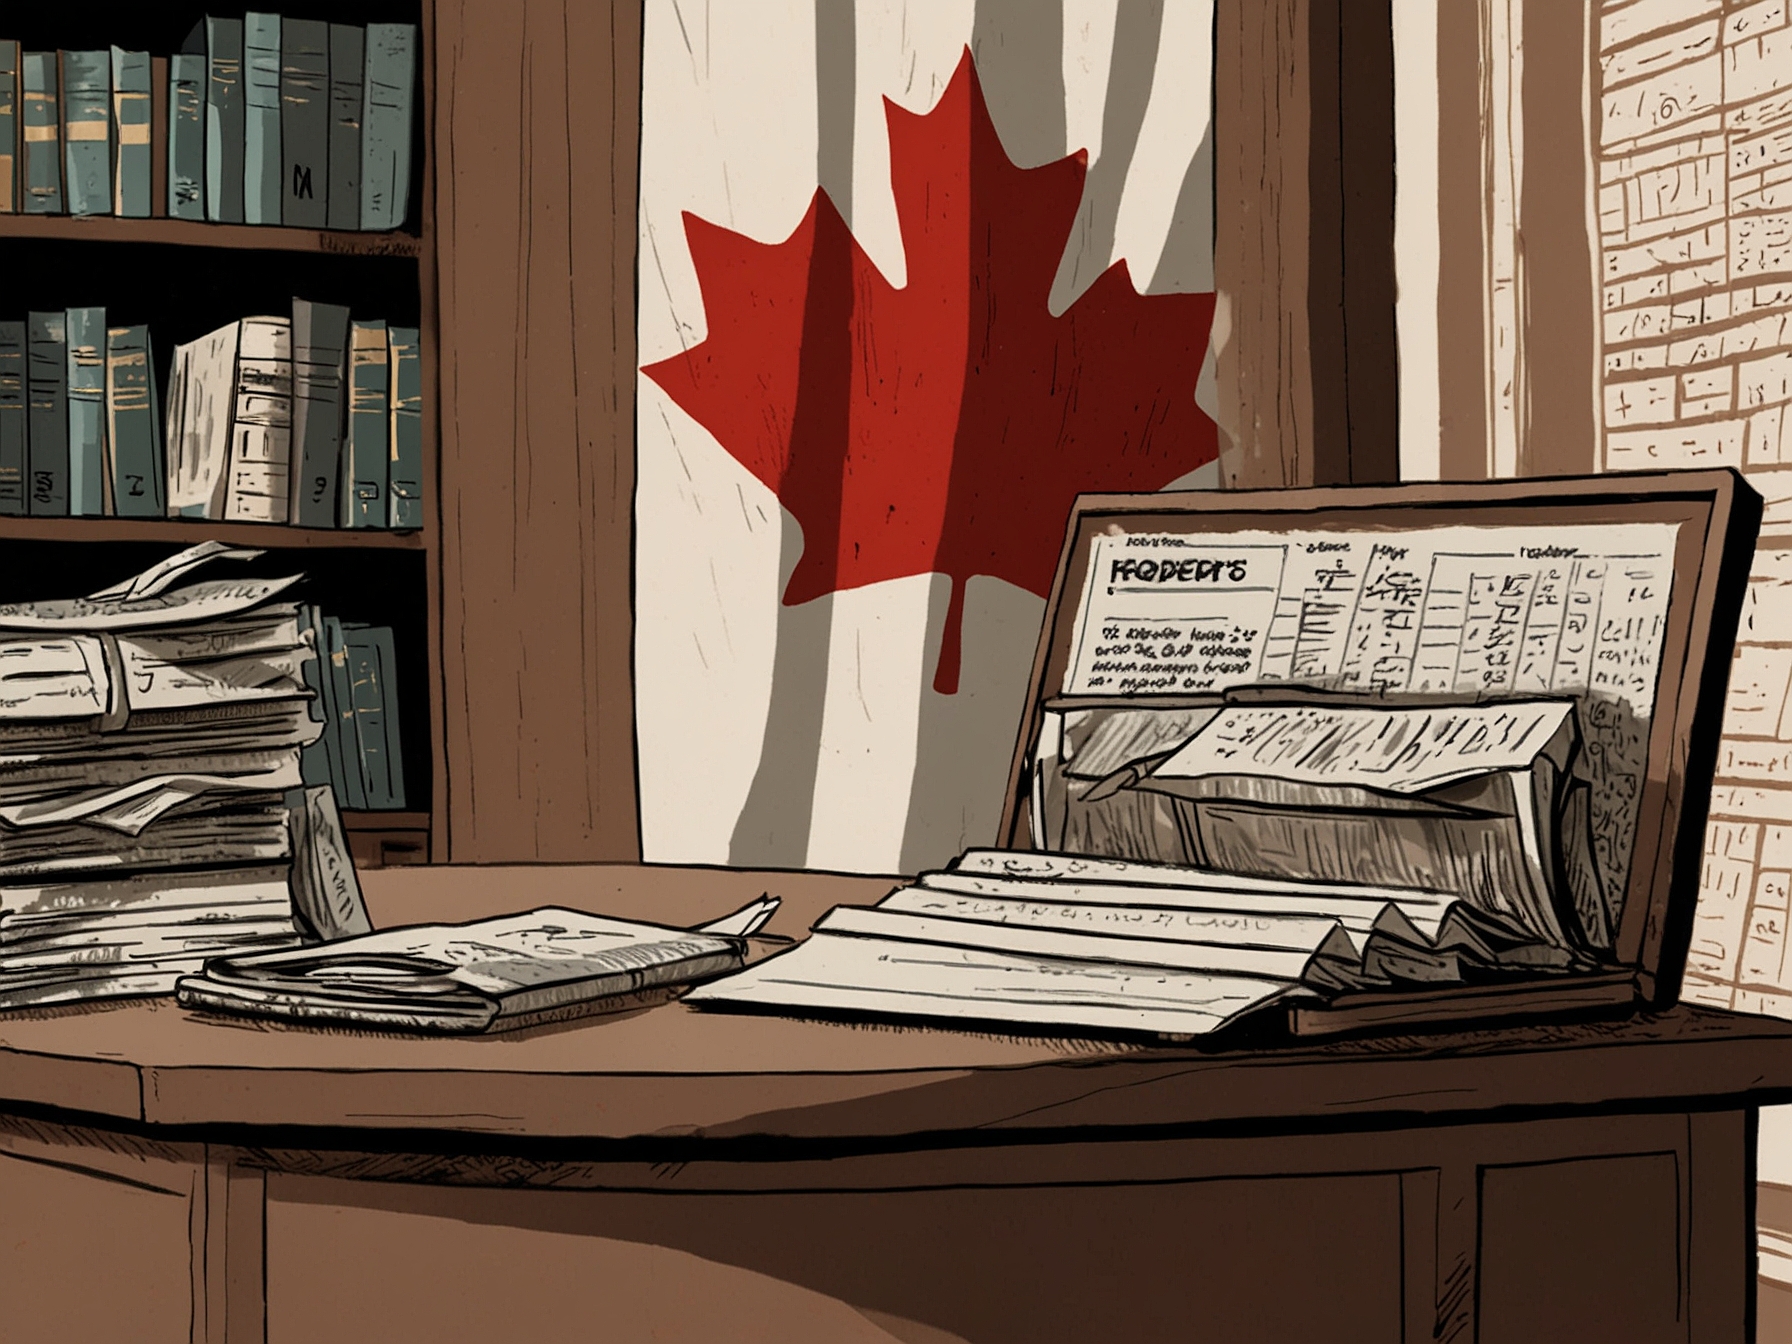 A depiction of files labeled 'human rights reports' gathering dust on a shelf to underline the negligence, with a Canadian flag and symbols of justice and diplomacy in the background.